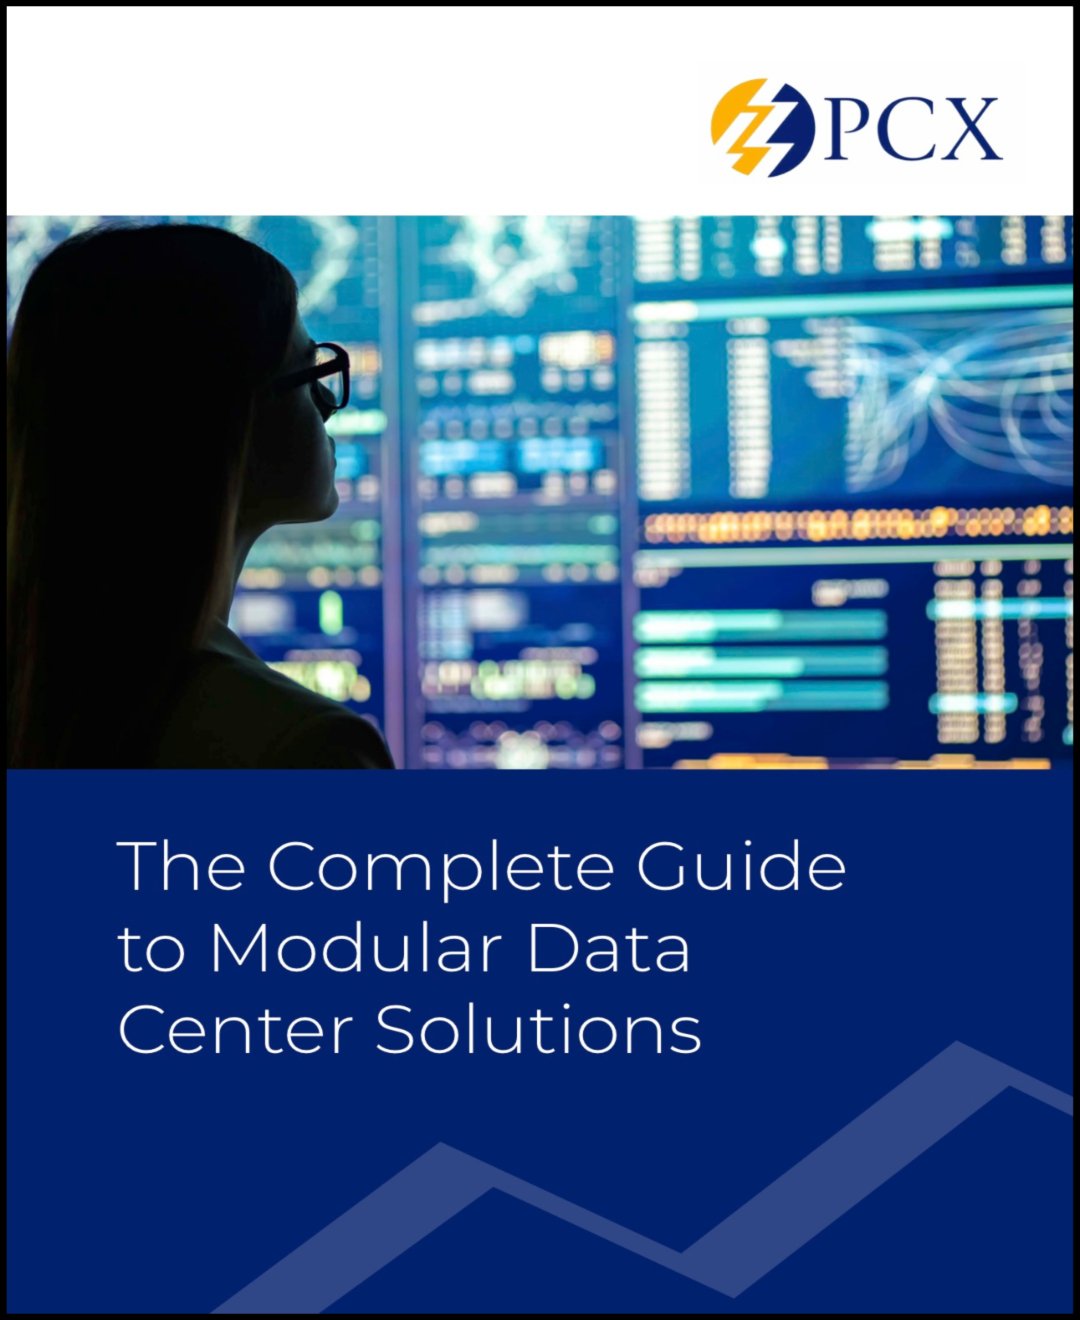 The Complete Guide to Modular Data Center Solutions e-book cover